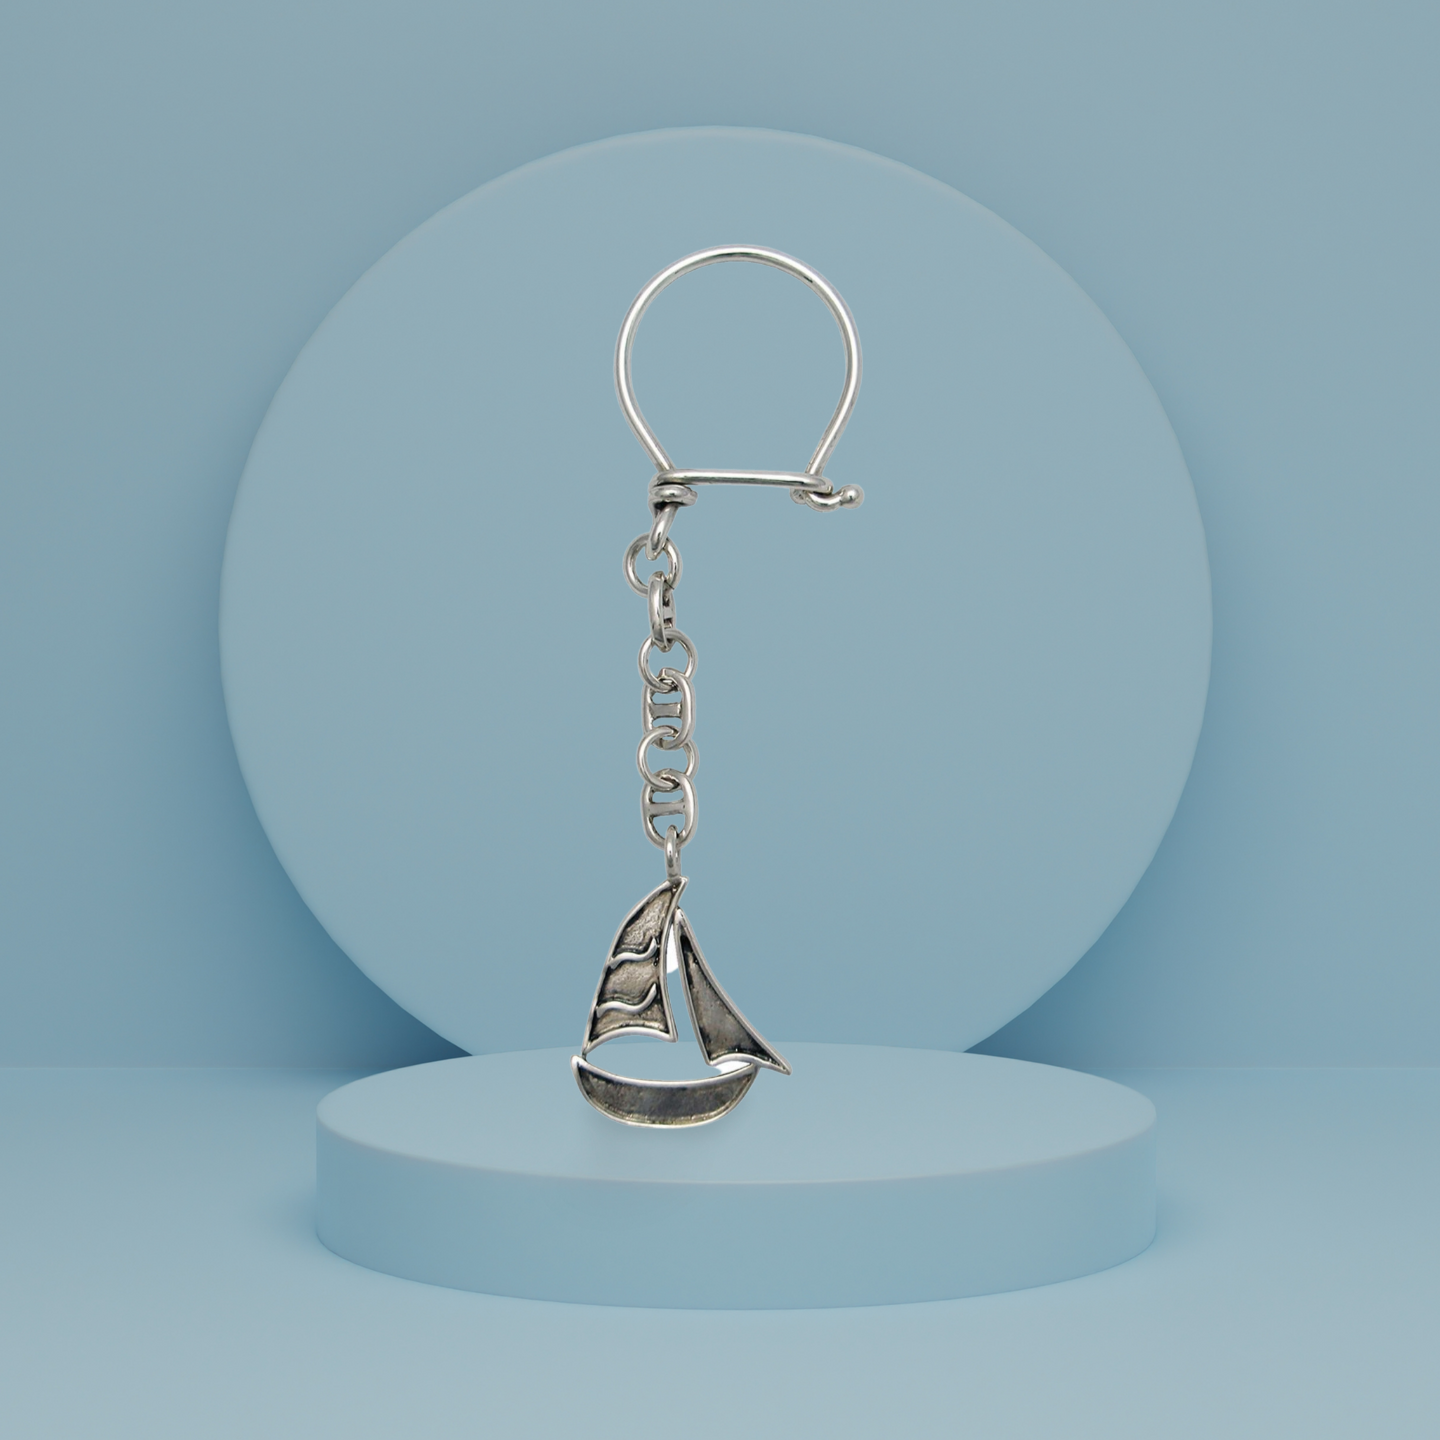 Greek Traditional Sailboat Key ring in sterling silver (MP-17)